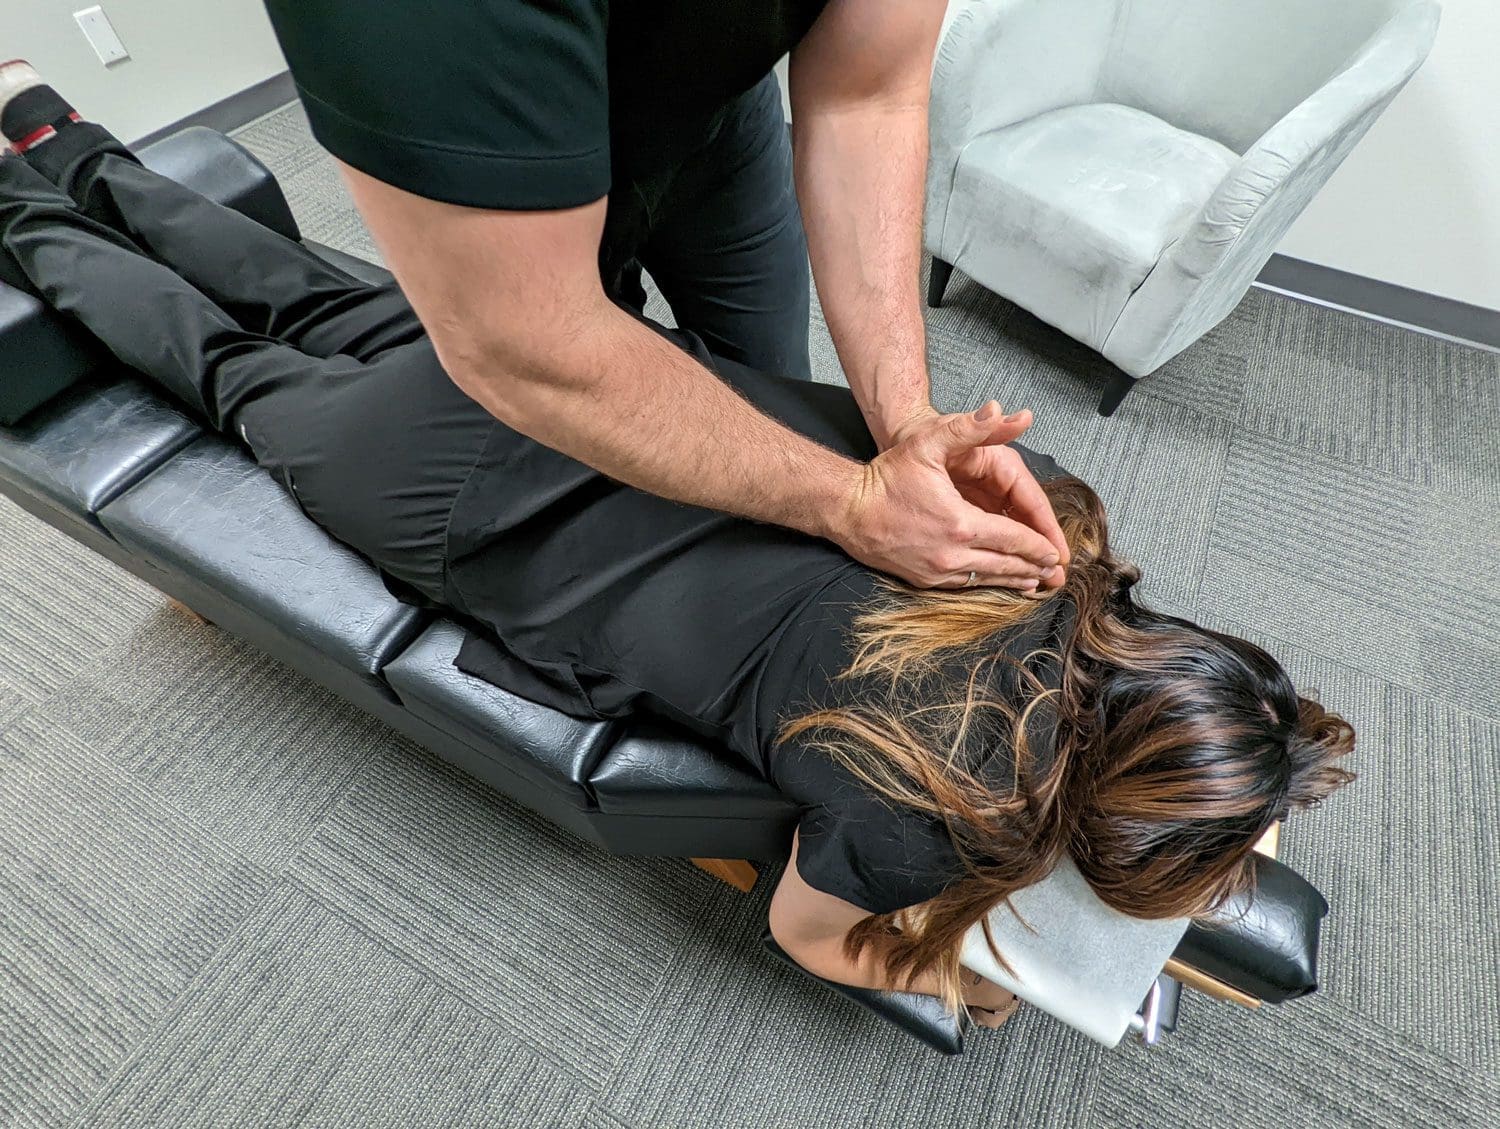 A chiropractor administering an adjustment on a patient.